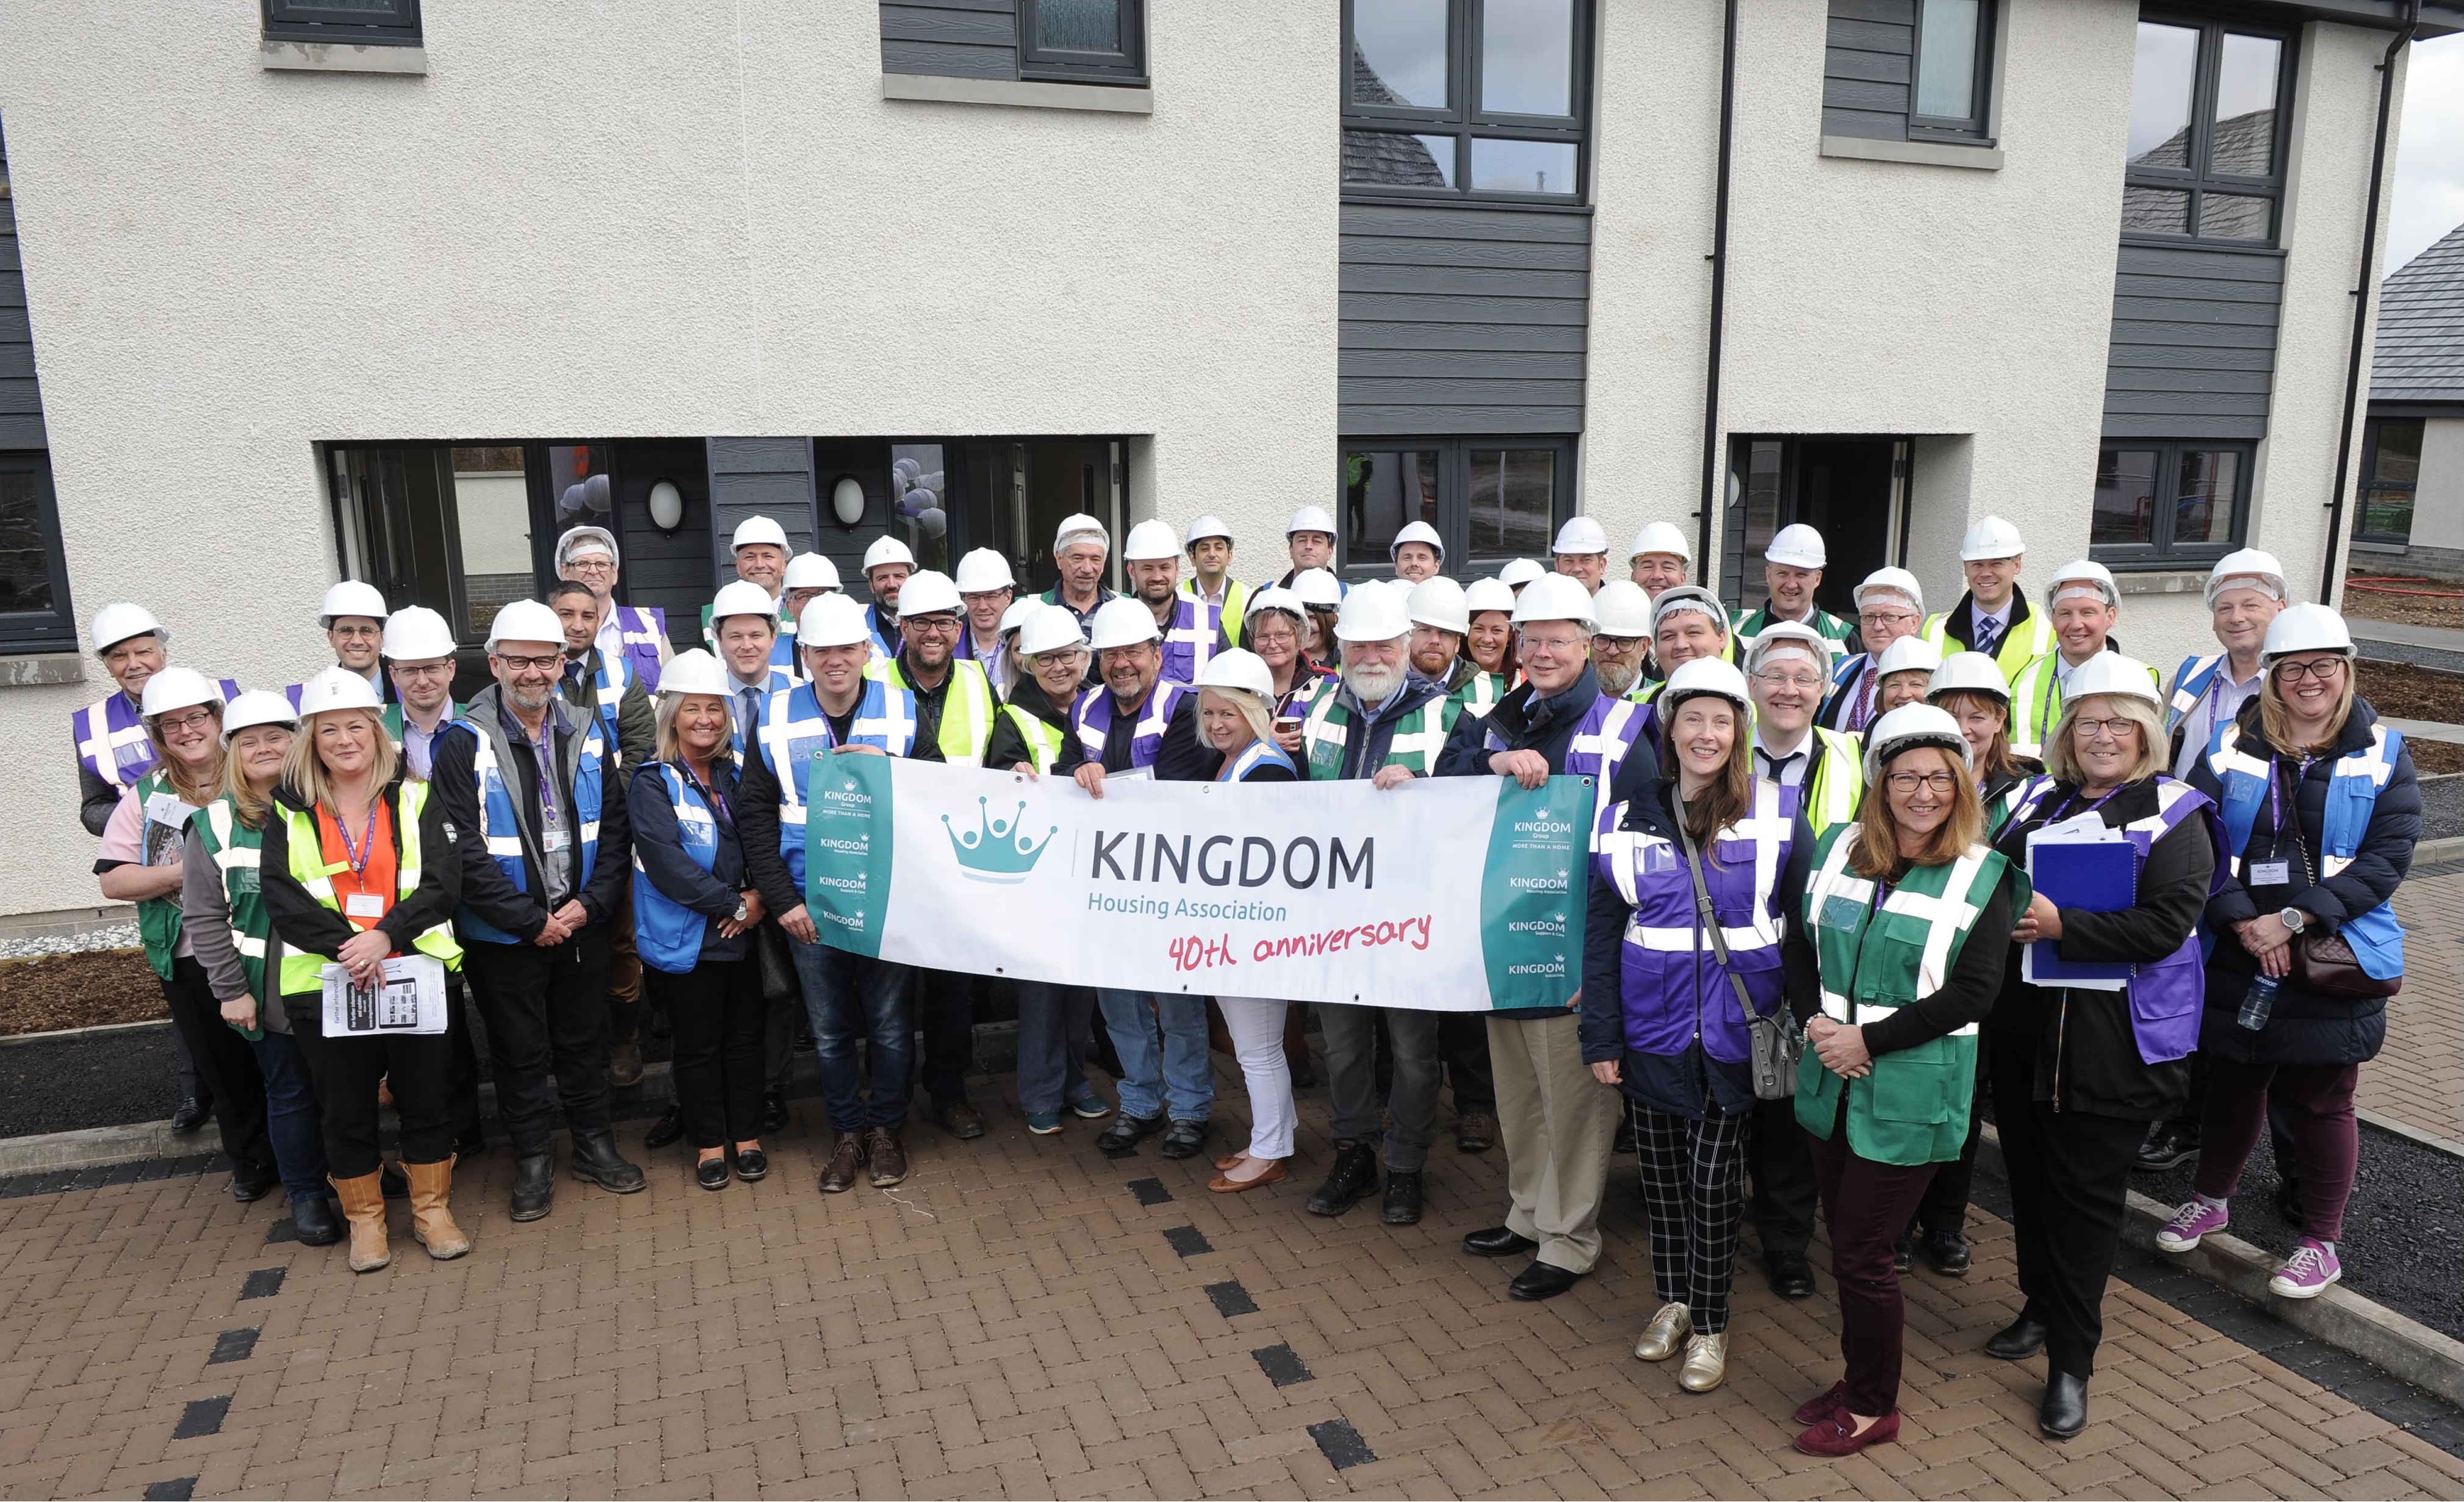 Kingdom marks 40th anniversary with annual site tour of new projects